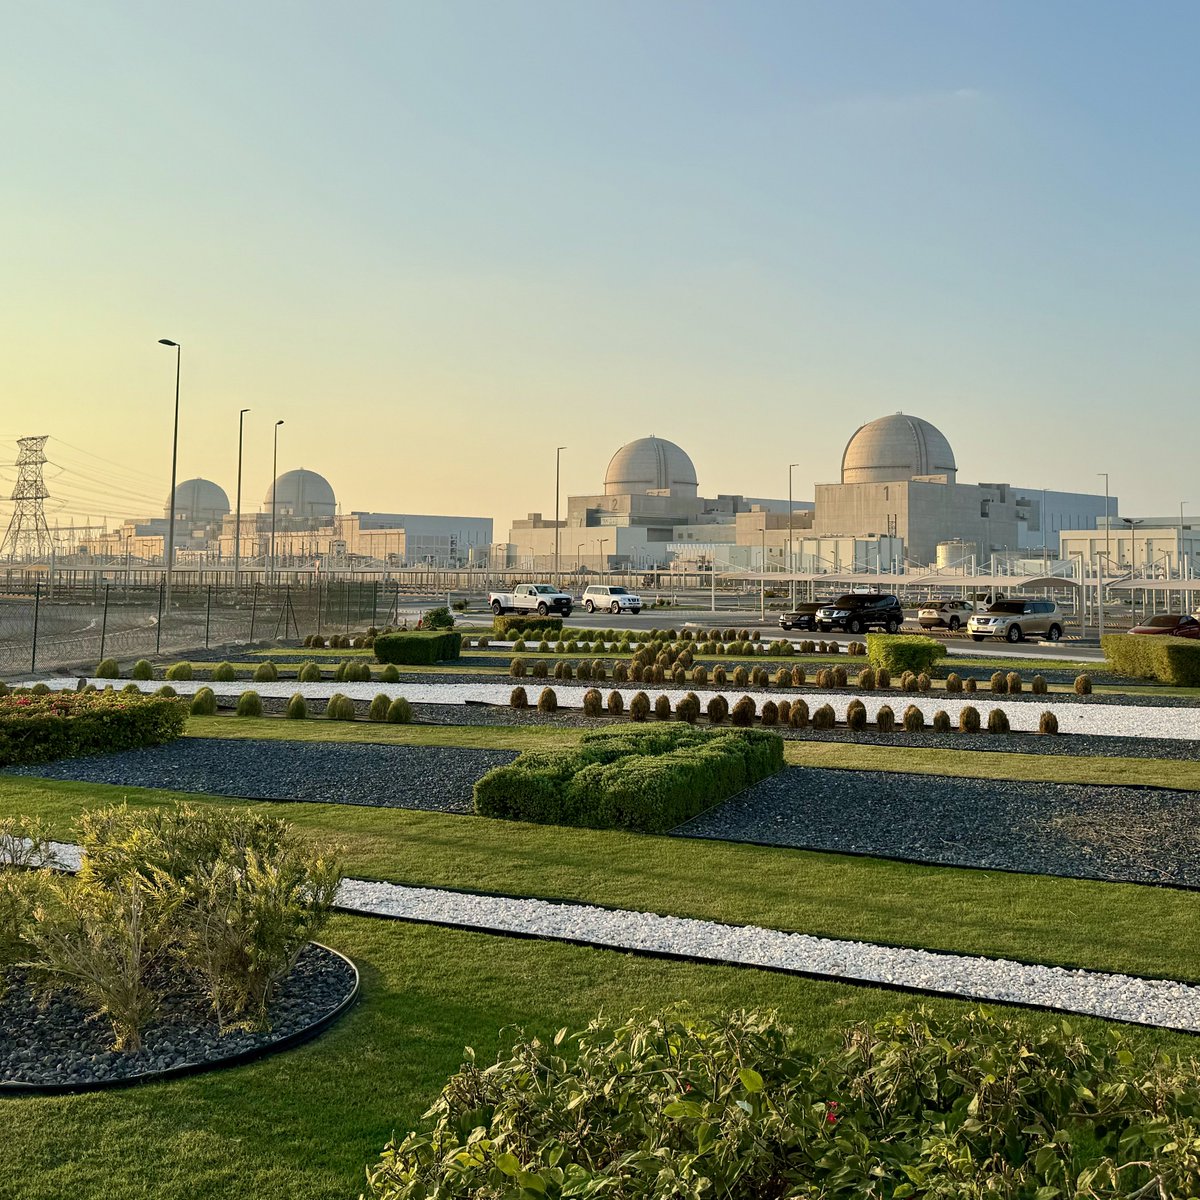 🇦🇪 UAE to build SECOND nuclear plant! Since 2017, they have added more clean energy per capita than any country in the world. This will likely secure their significant lead. Their first plant was called Barakah, “blessing”. What should the next one be called?